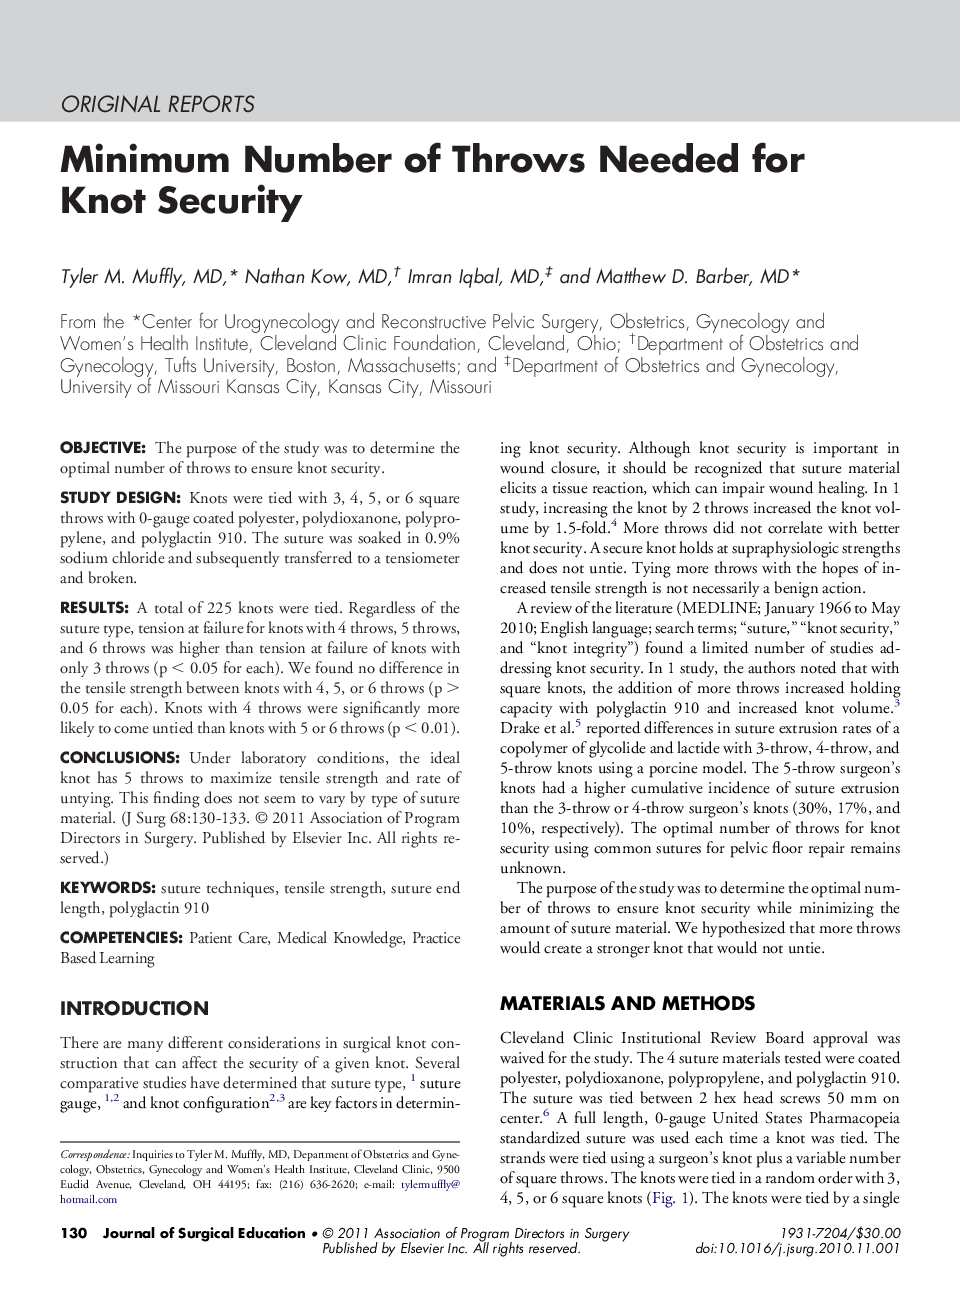 Minimum Number of Throws Needed for Knot Security